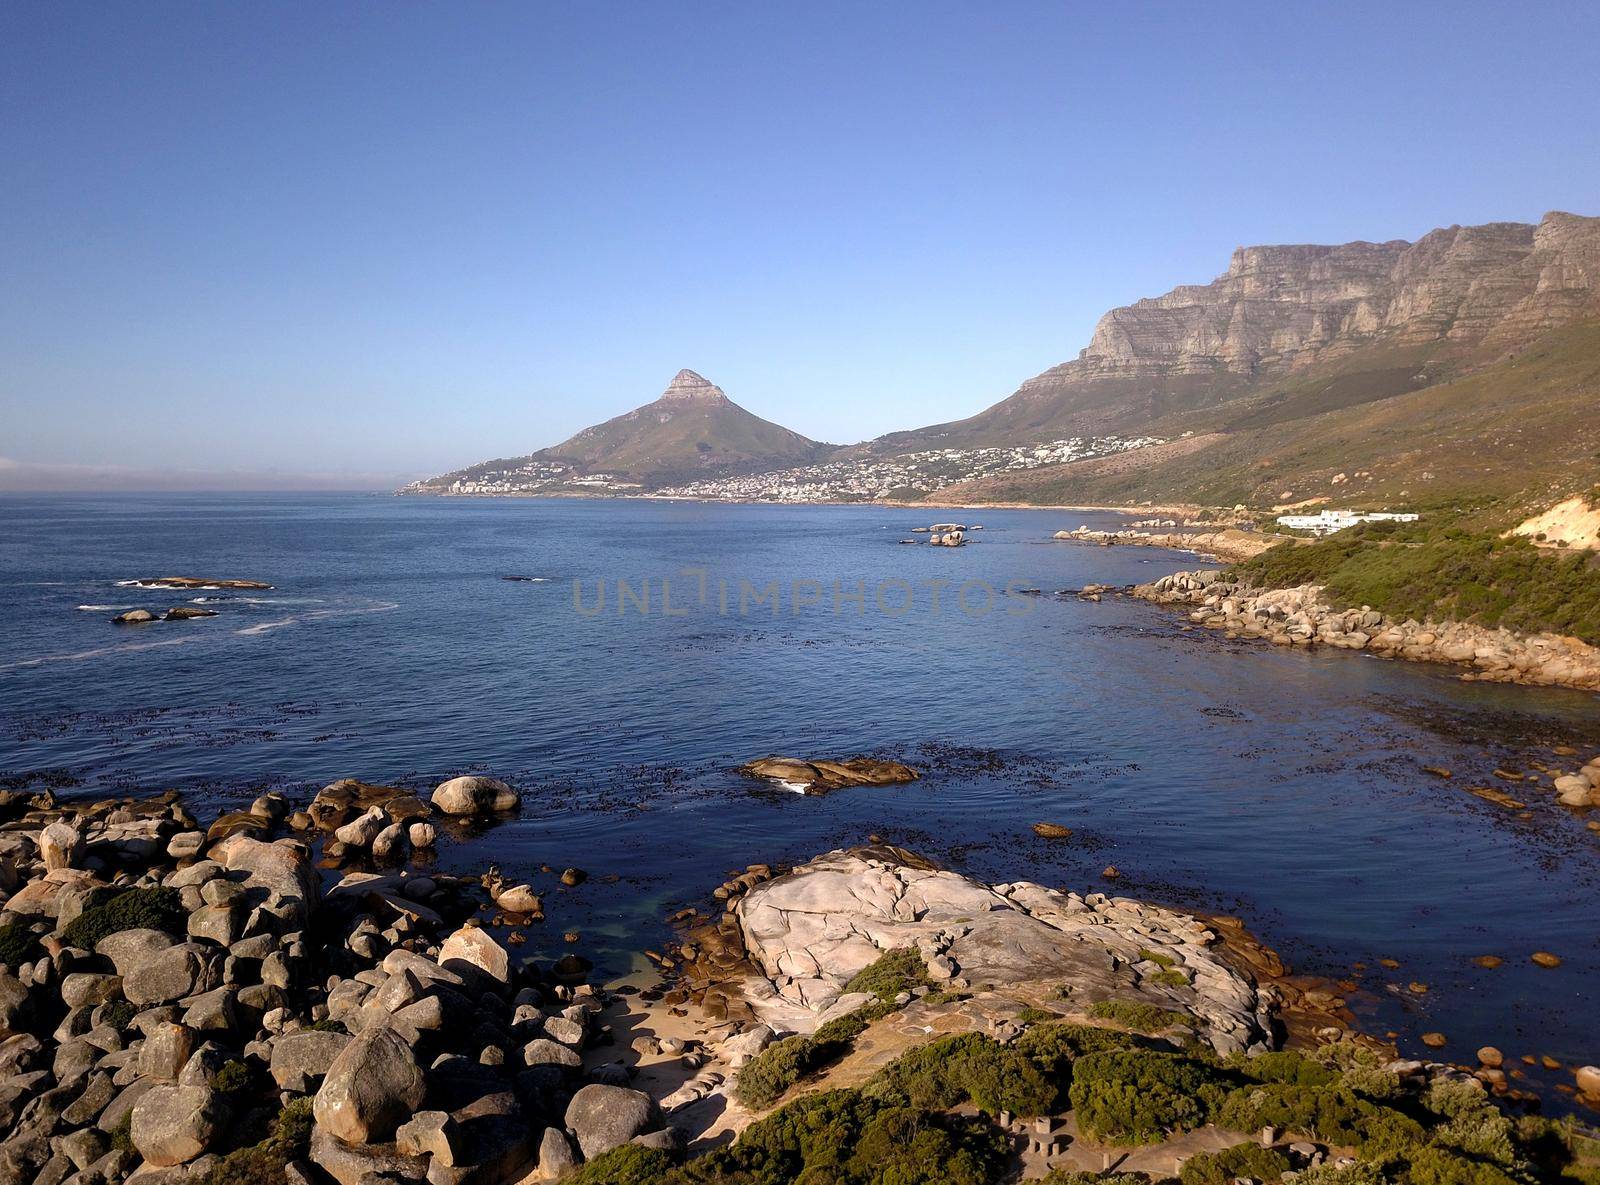 Aerial view across the sea at Oudekraal to Cape Town, South Africa